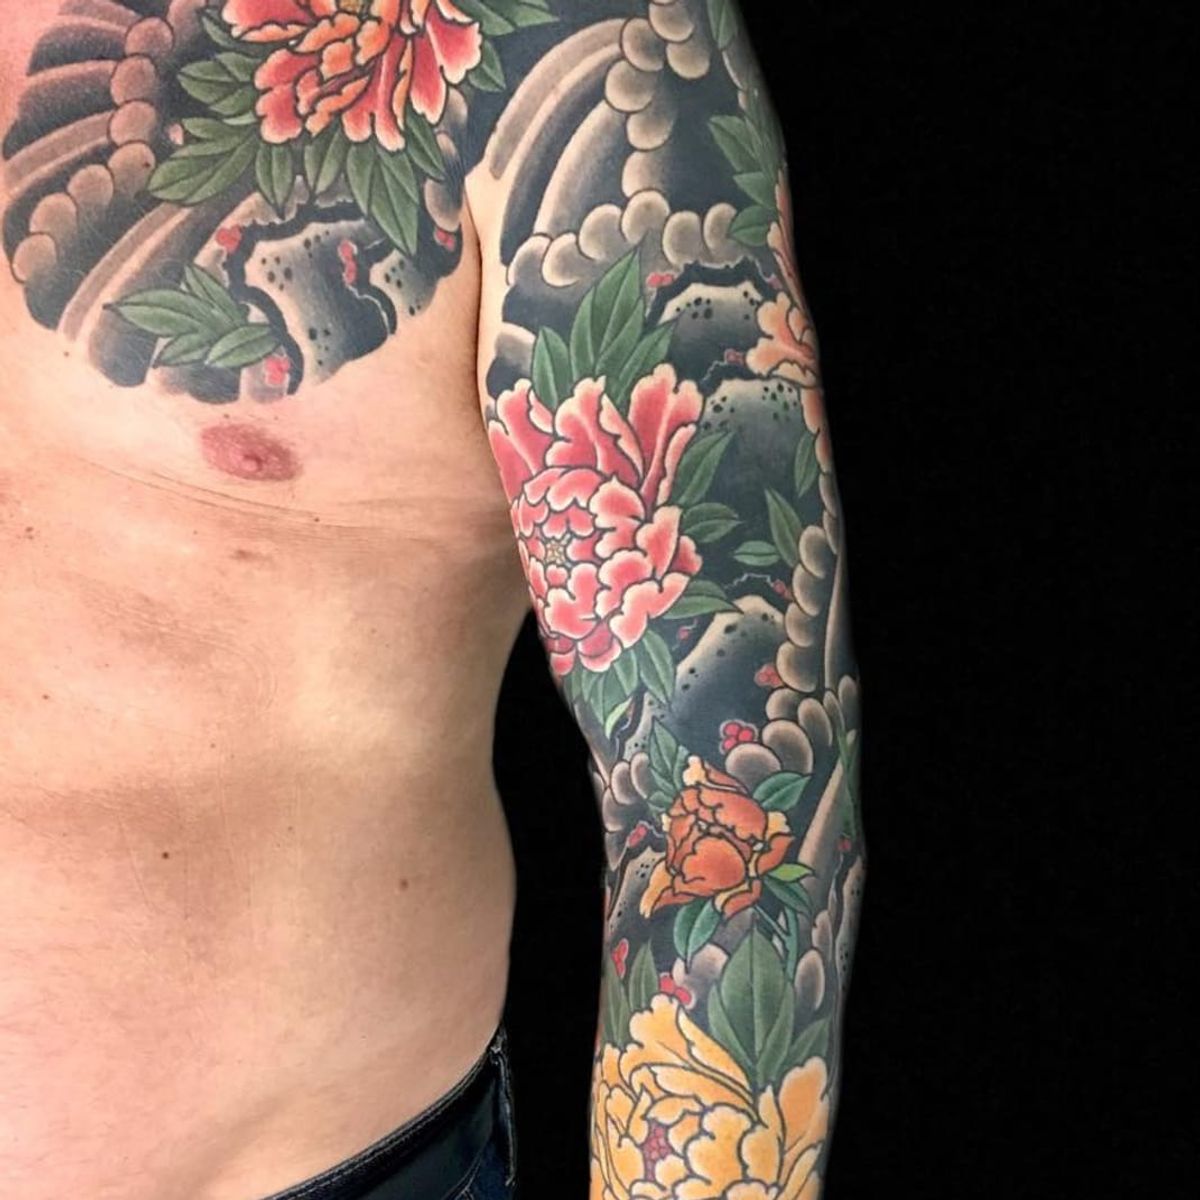 Tattoo uploaded by Ross Howerton • A sleeve full of peonies by Henning ...